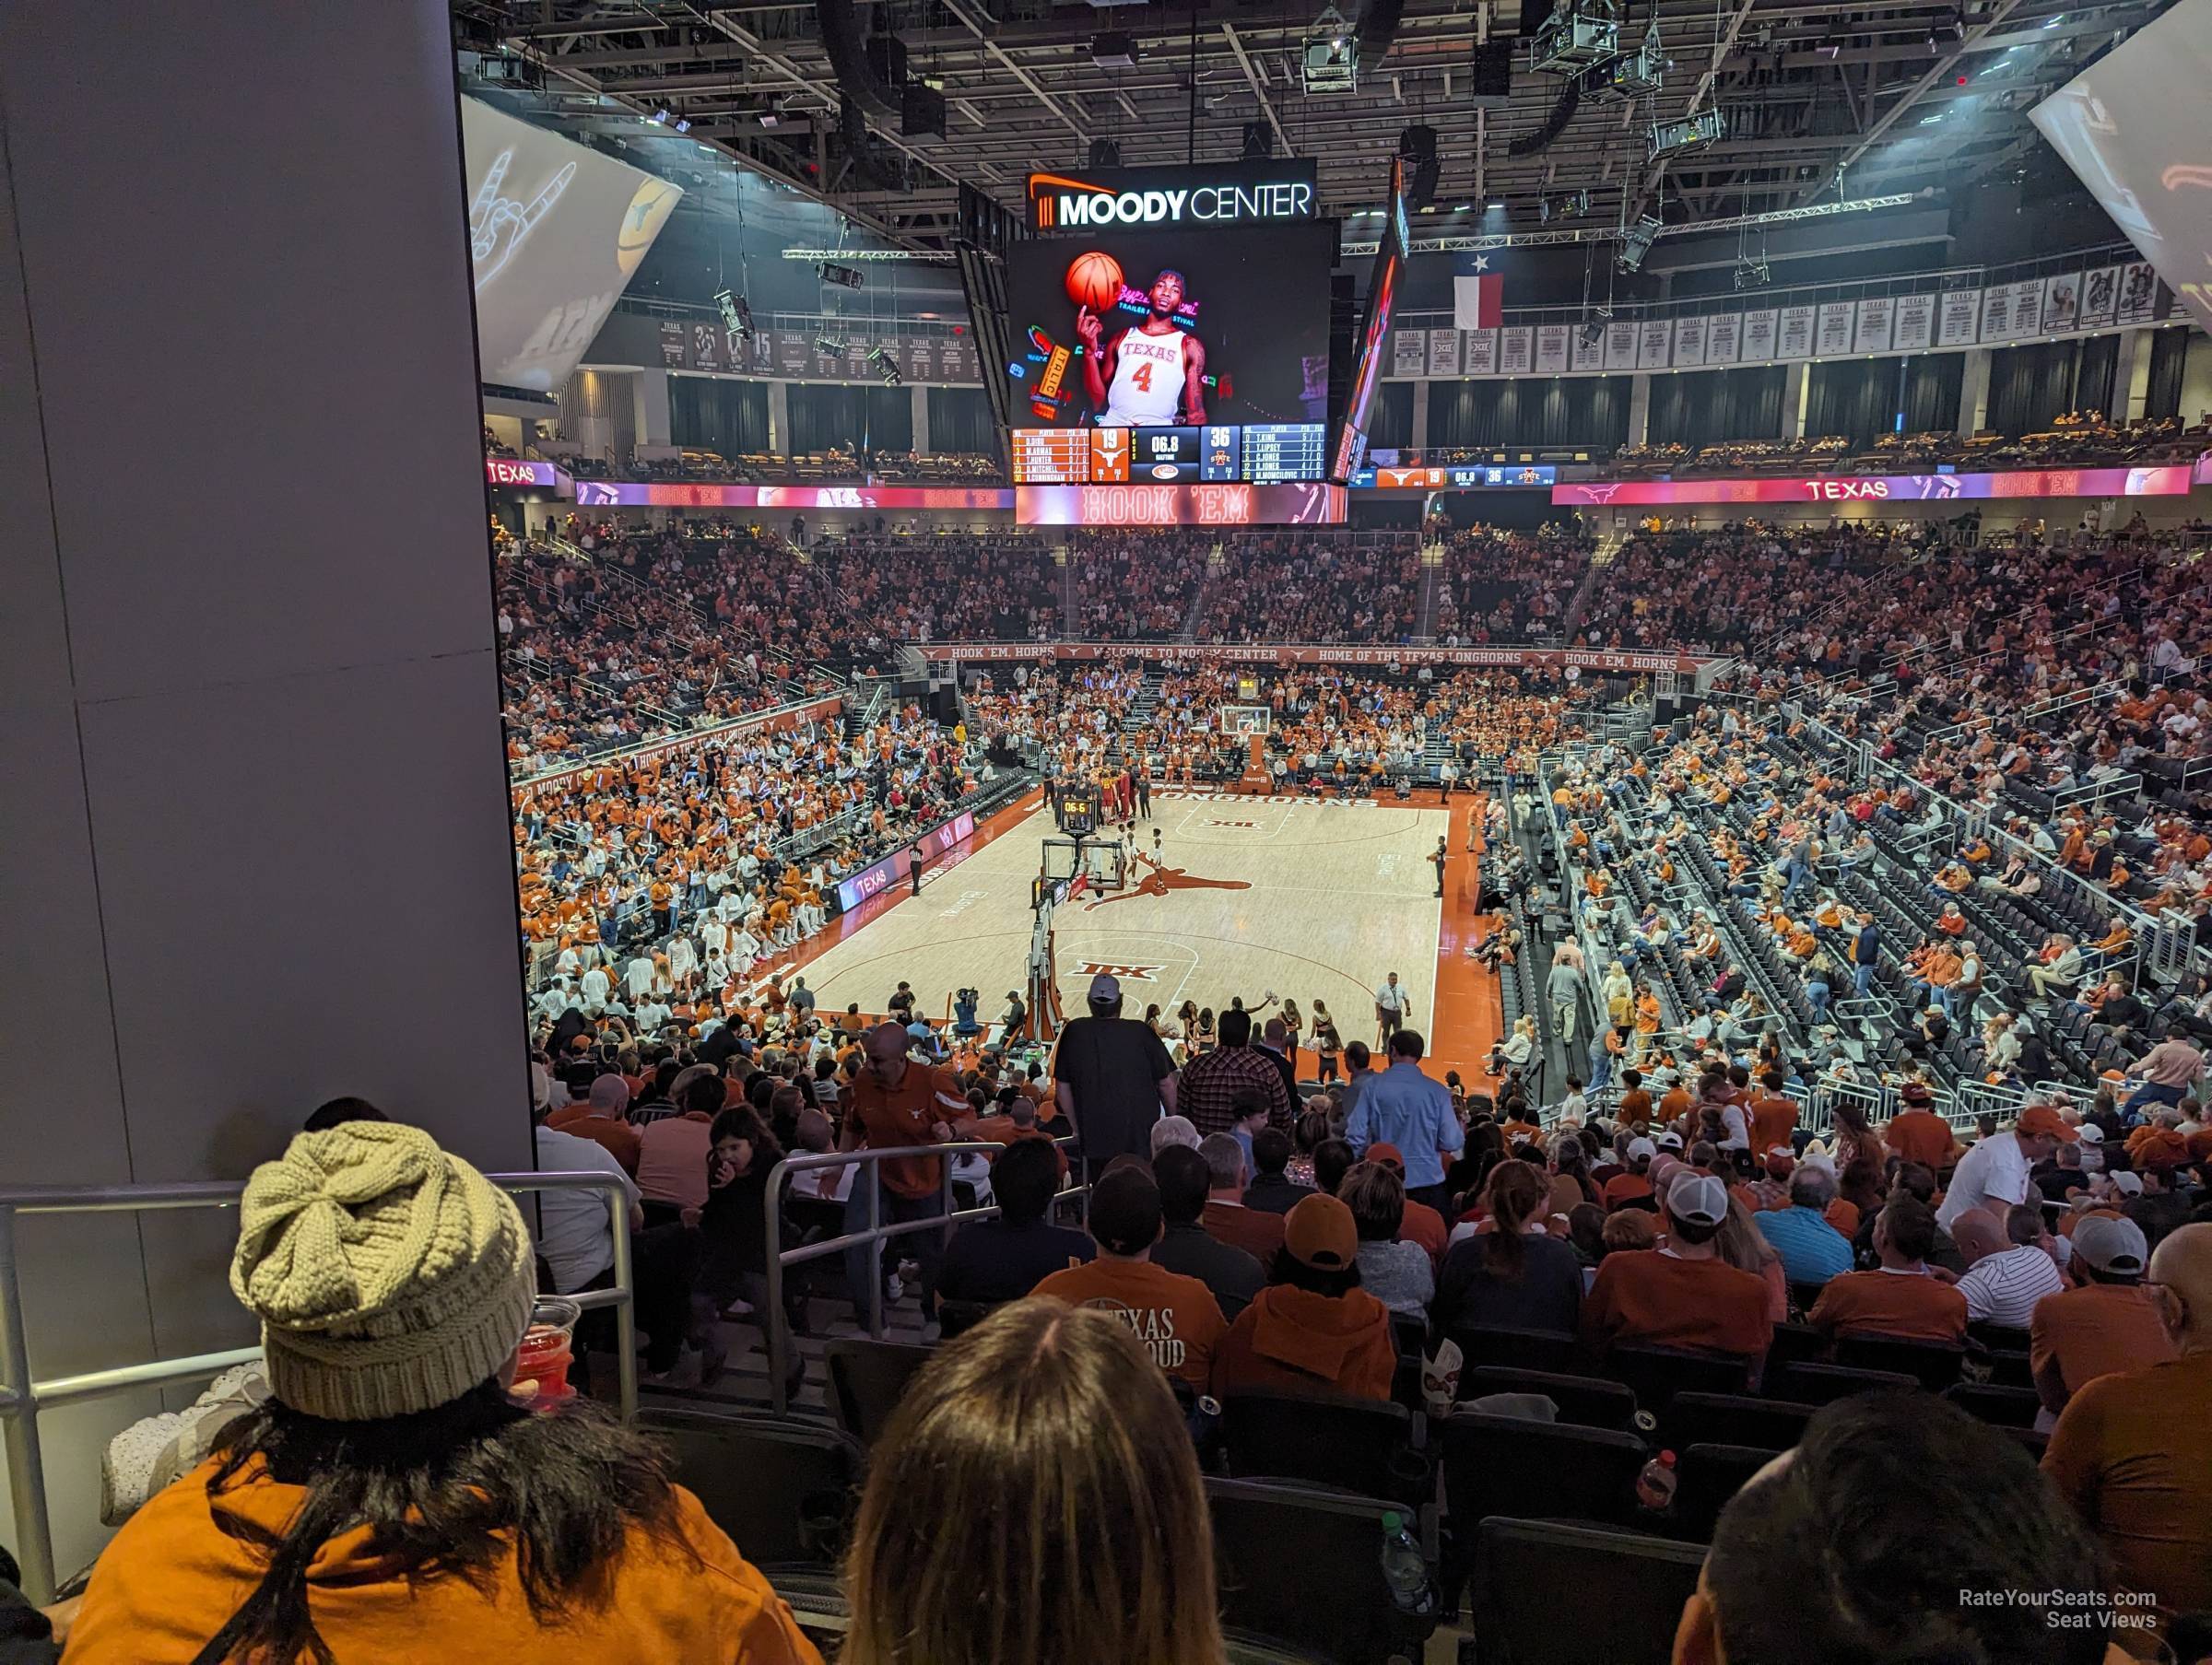 section 112 seat view  for basketball - moody center atx